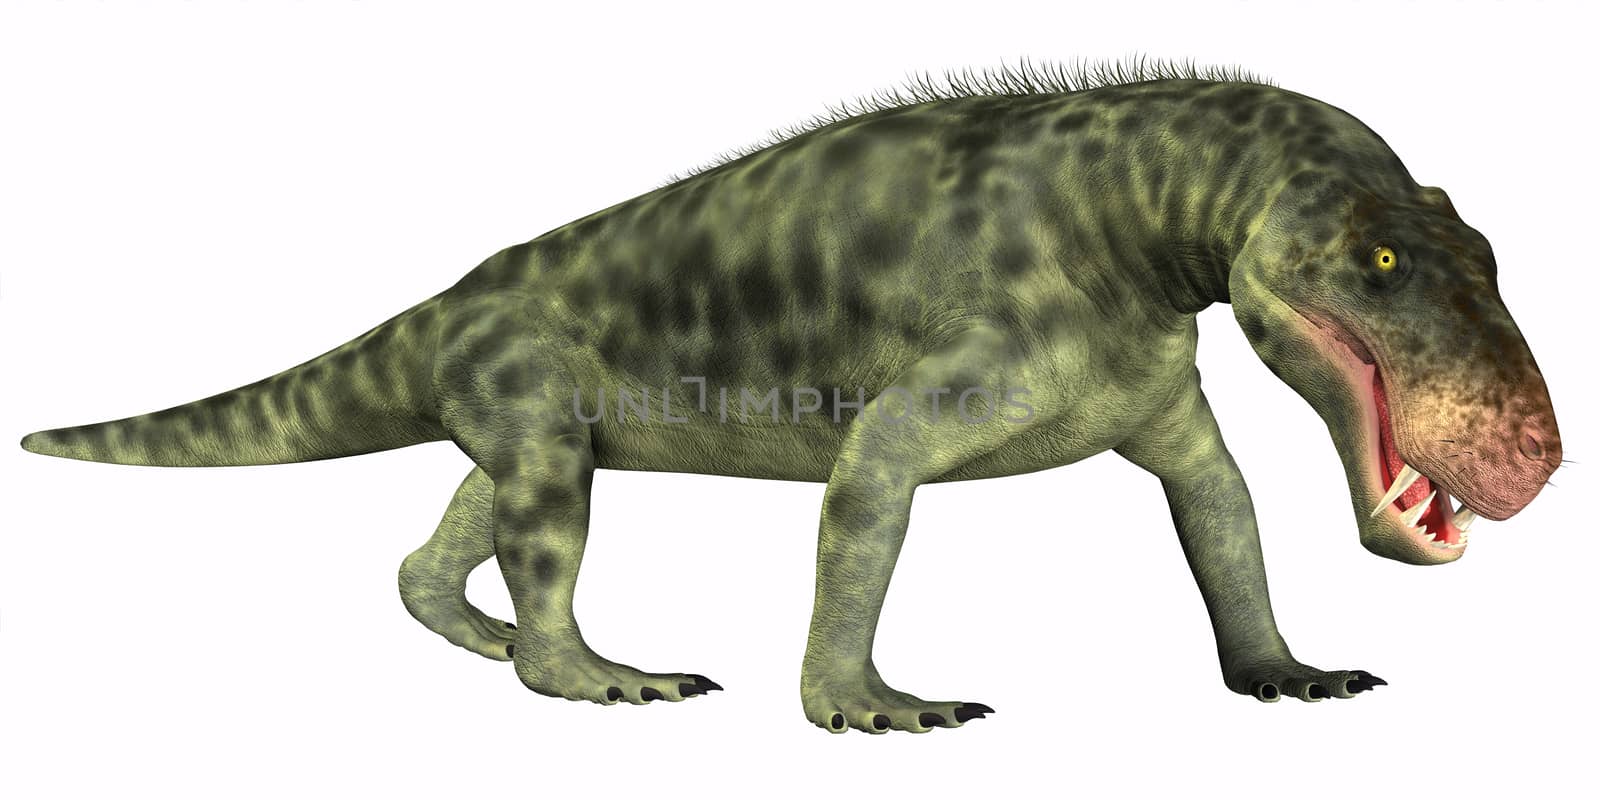 Inostrancevia was a carnivorous reptile dinosaur that lived in the Permian Age of Russia.